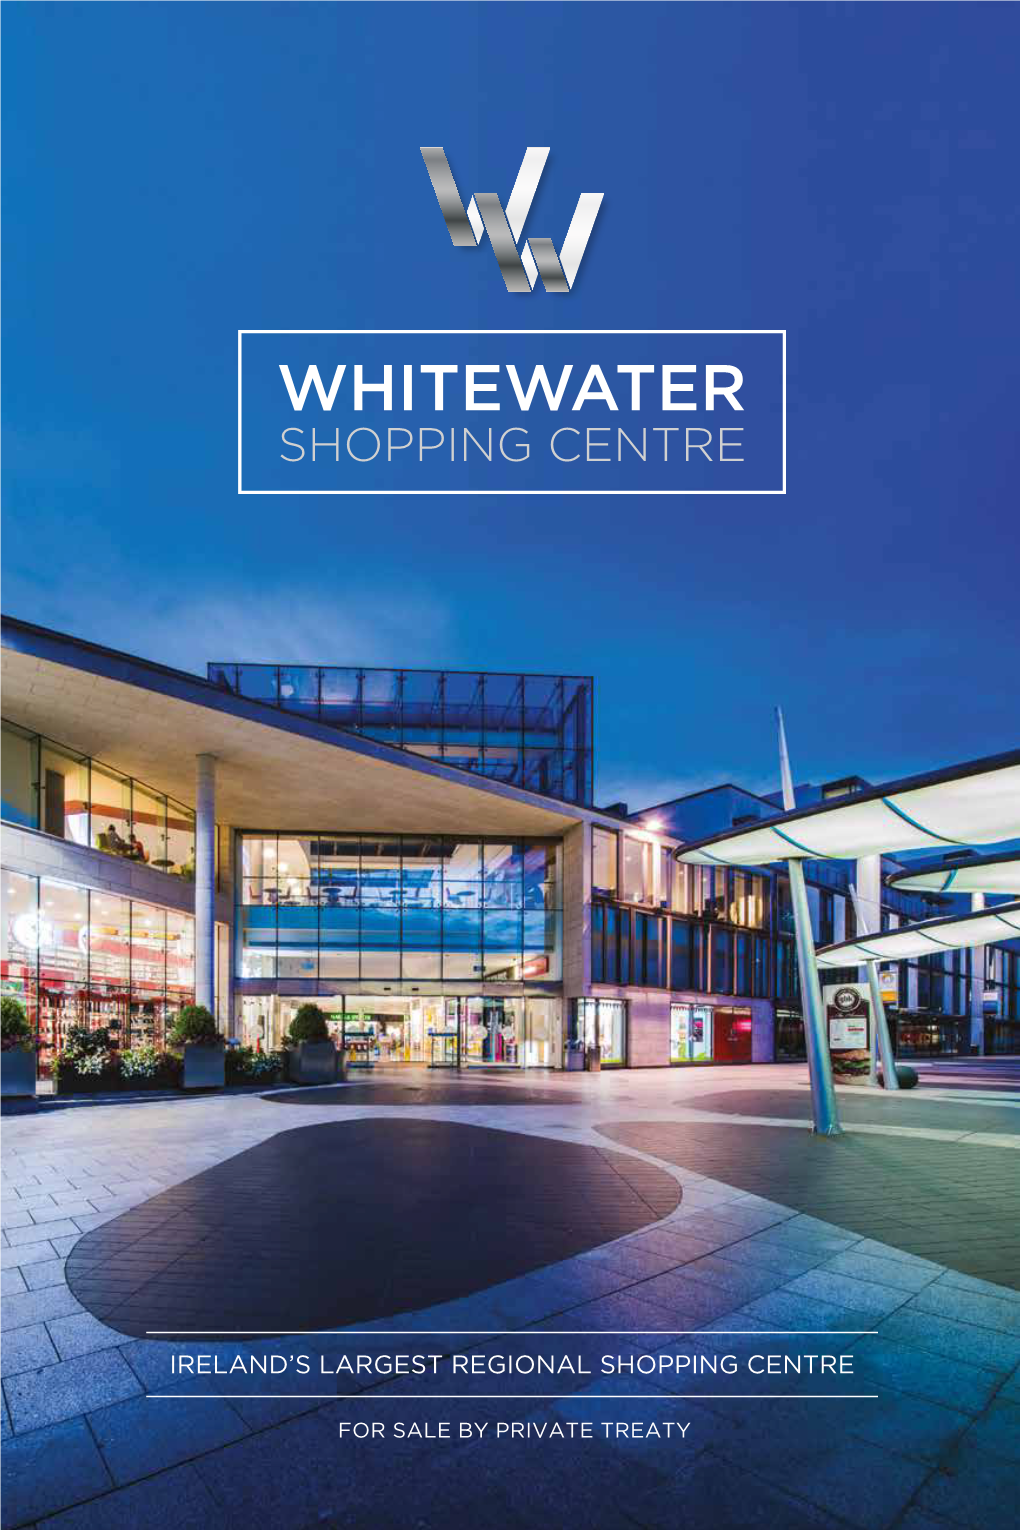 Whitewater Shopping Centre